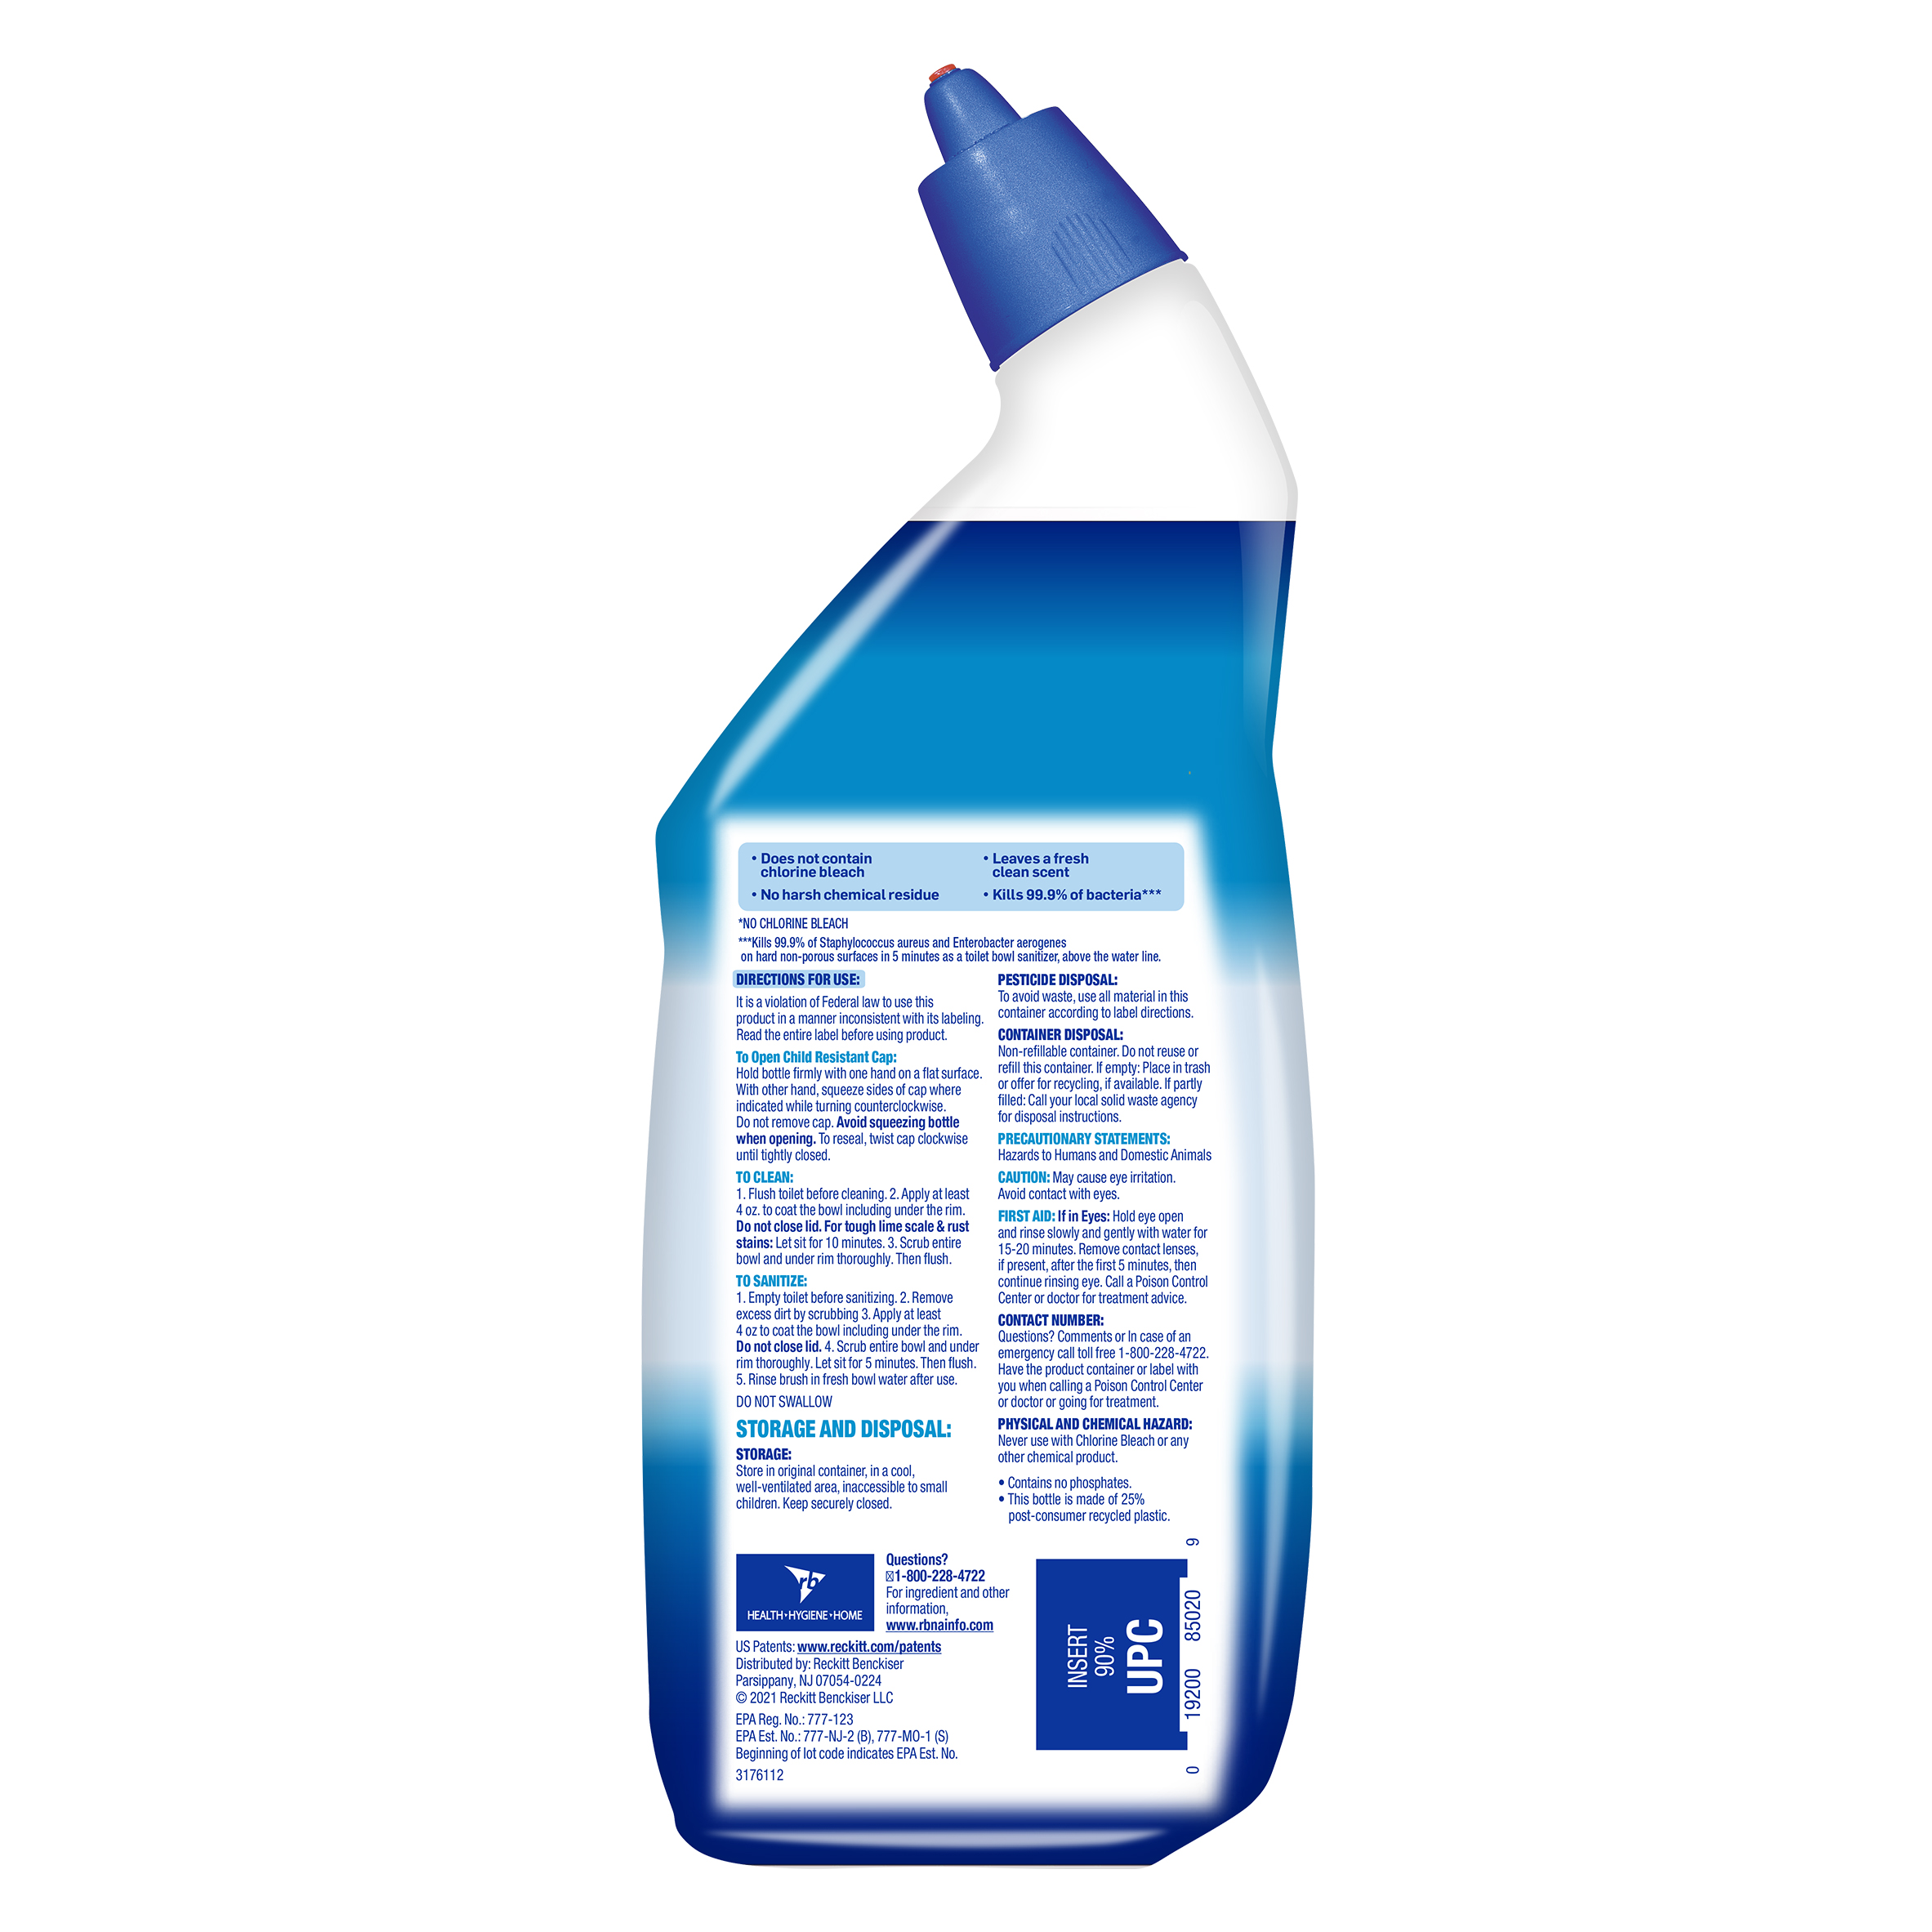 Lysol Toilet Bowl Cleaner Gel, For Cleaning and Disinfecting, Bleach Free, Ocean Fresh Scent, 24oz - image 2 of 6